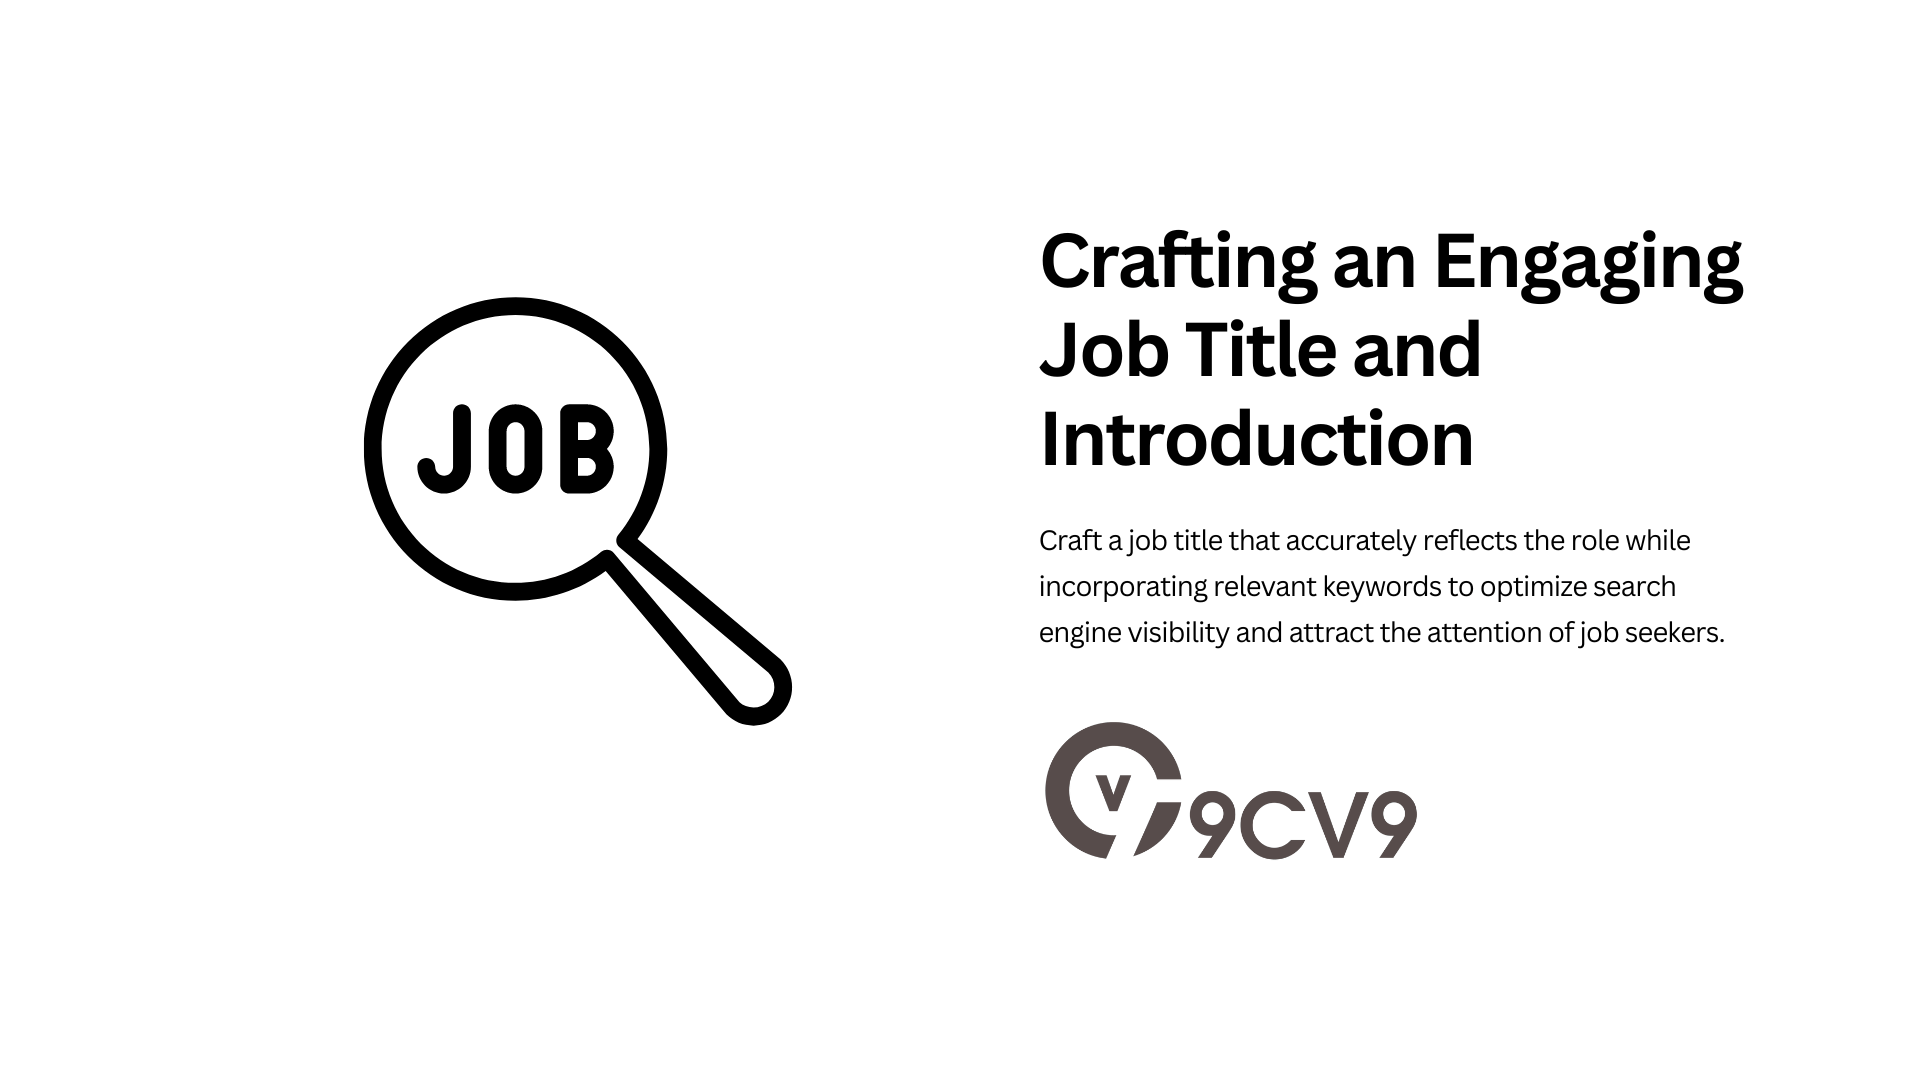 Crafting an Engaging Job Title and Introduction